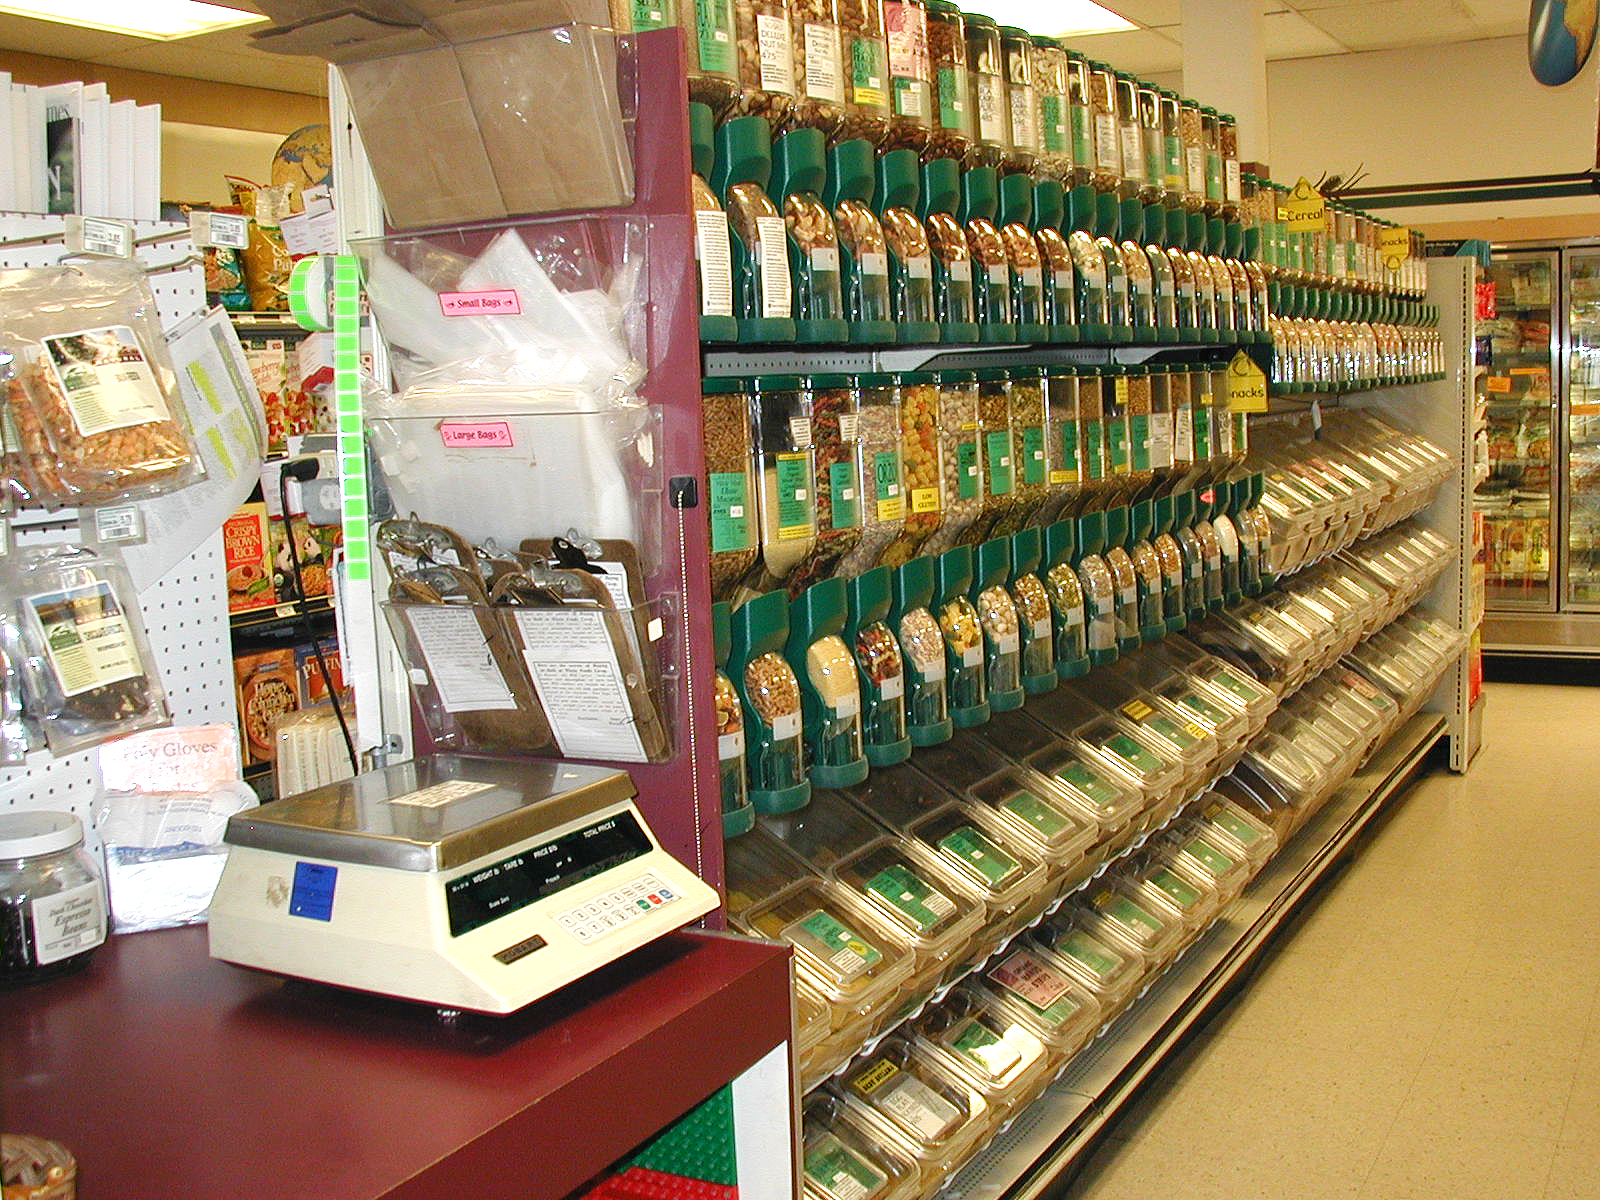 In the Whole Foods Coop Duluth MN, the bulk food section features various containers of grains and legumes neatly displayed on a shelf. The labeled containers dispense products into bags below. A digital scale is conveniently situated on a counter in the foreground, adjacent to the shelf.